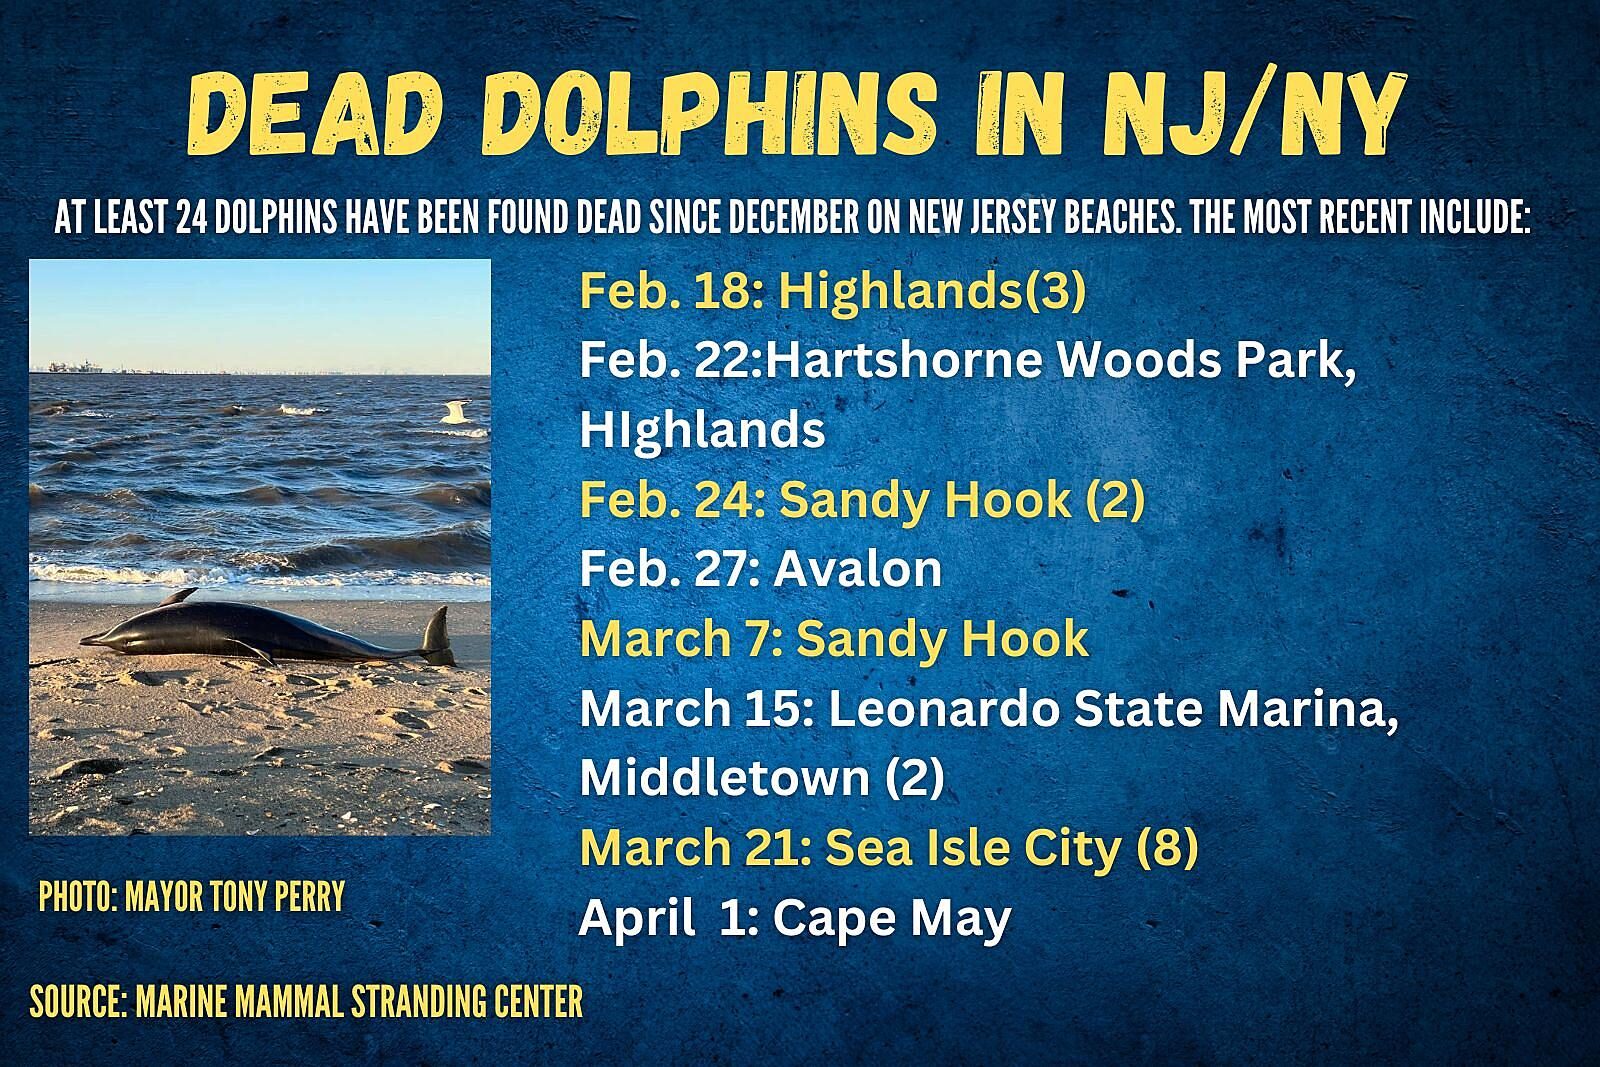 Most recent dolphin strandings on New Jersey